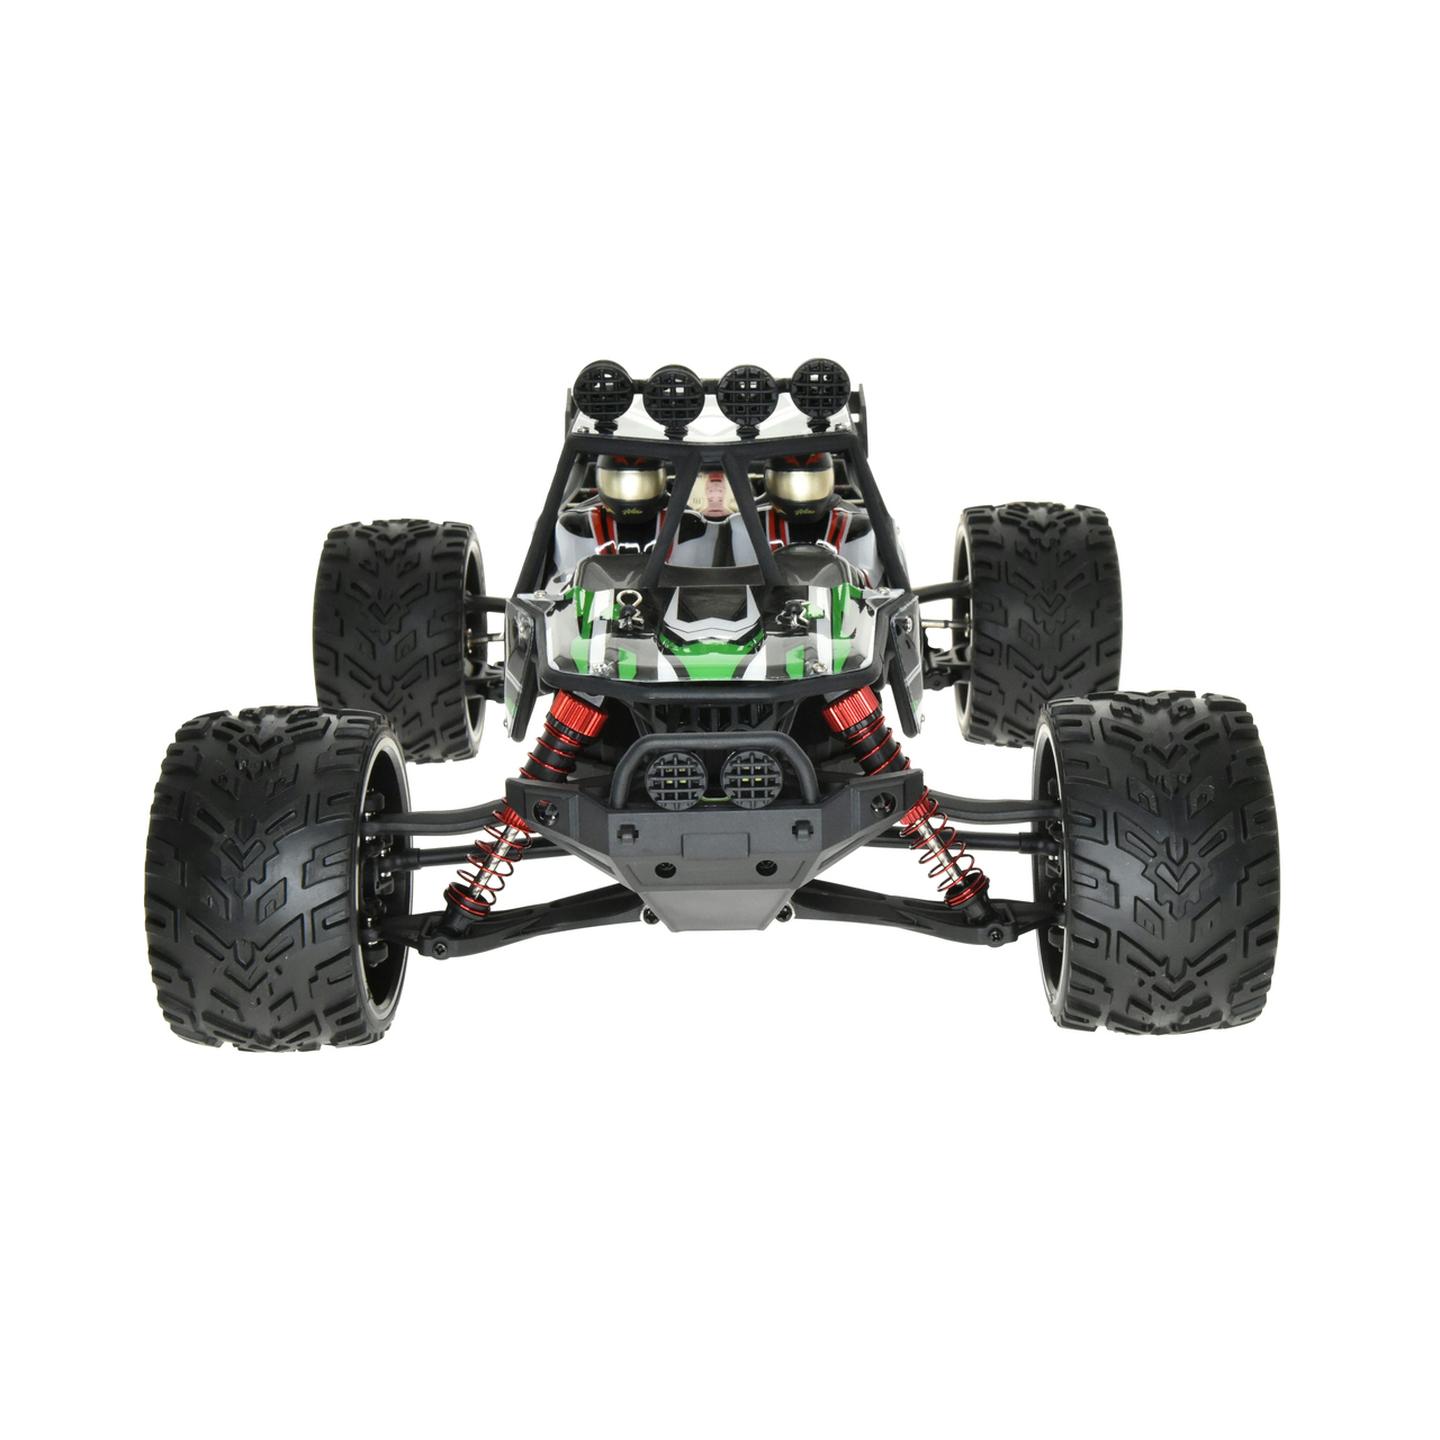 1:12 Scale Remote Control High Speed Buggy